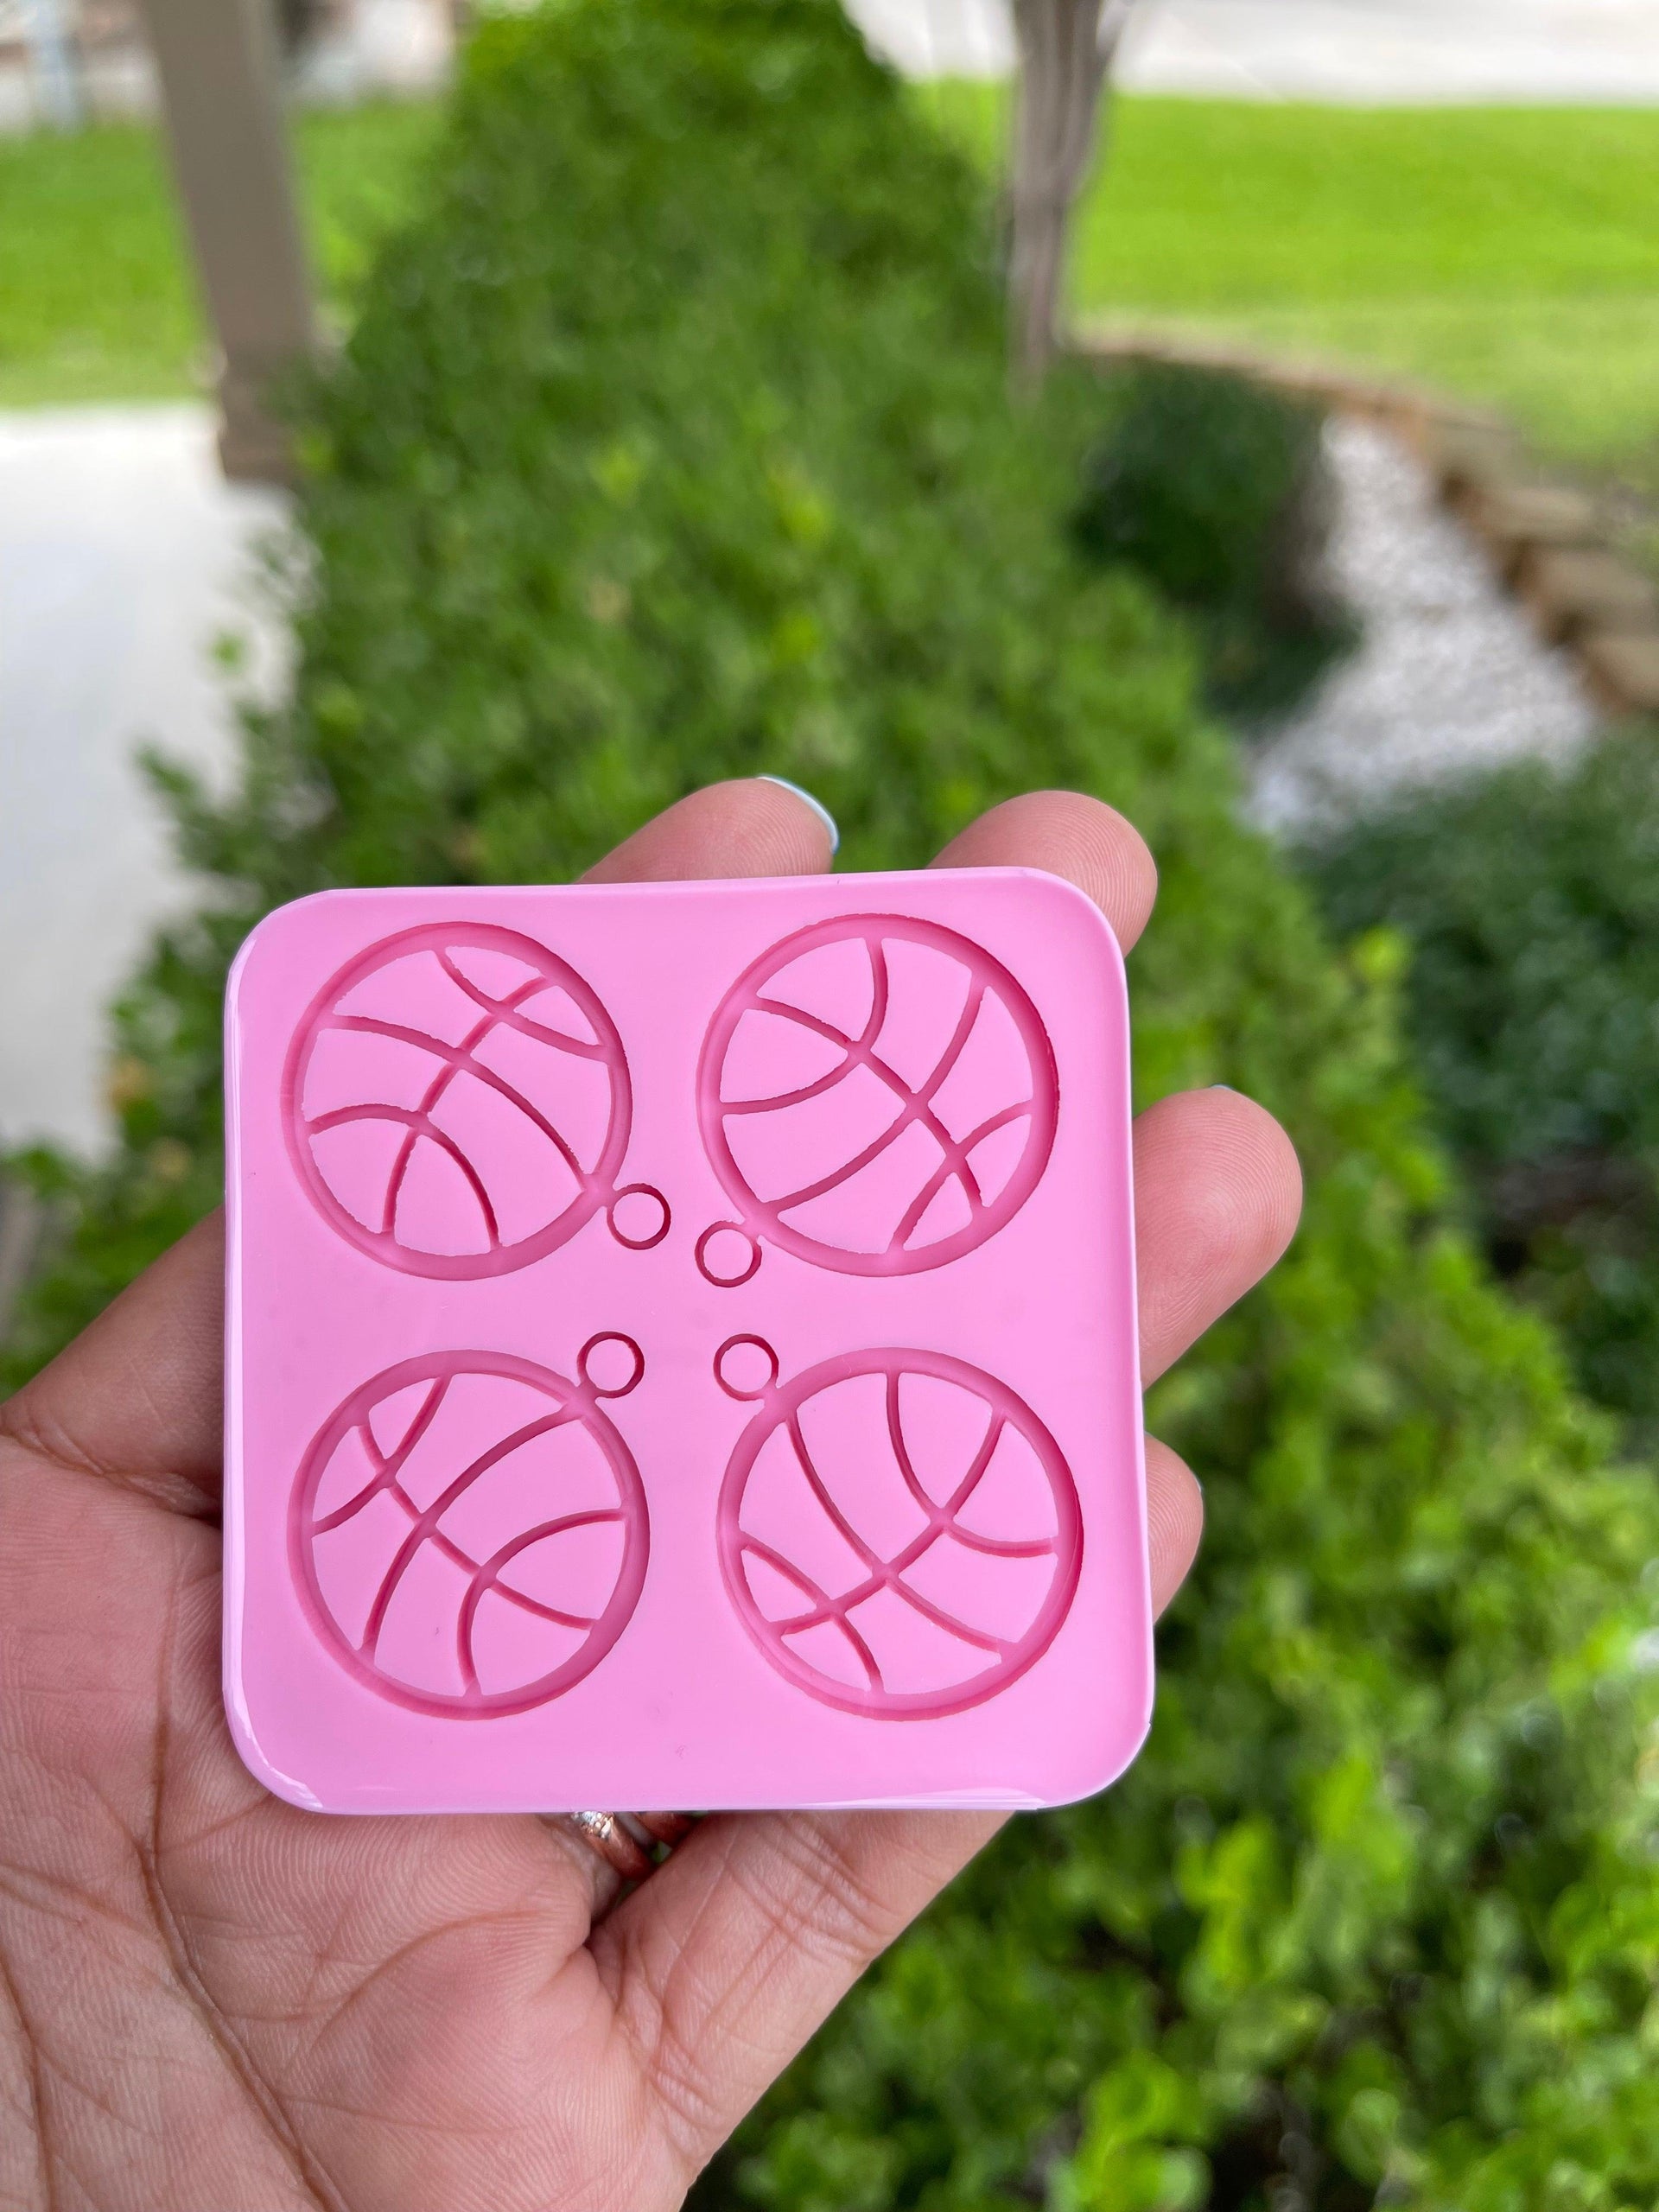 Basketball Earrings Mold - Mold for Resin - Basketball Mold - NBA Ball Mold - Keychain mold - Silicone Mold for Epoxy Resin - Art By Suleny Craft Store LLC